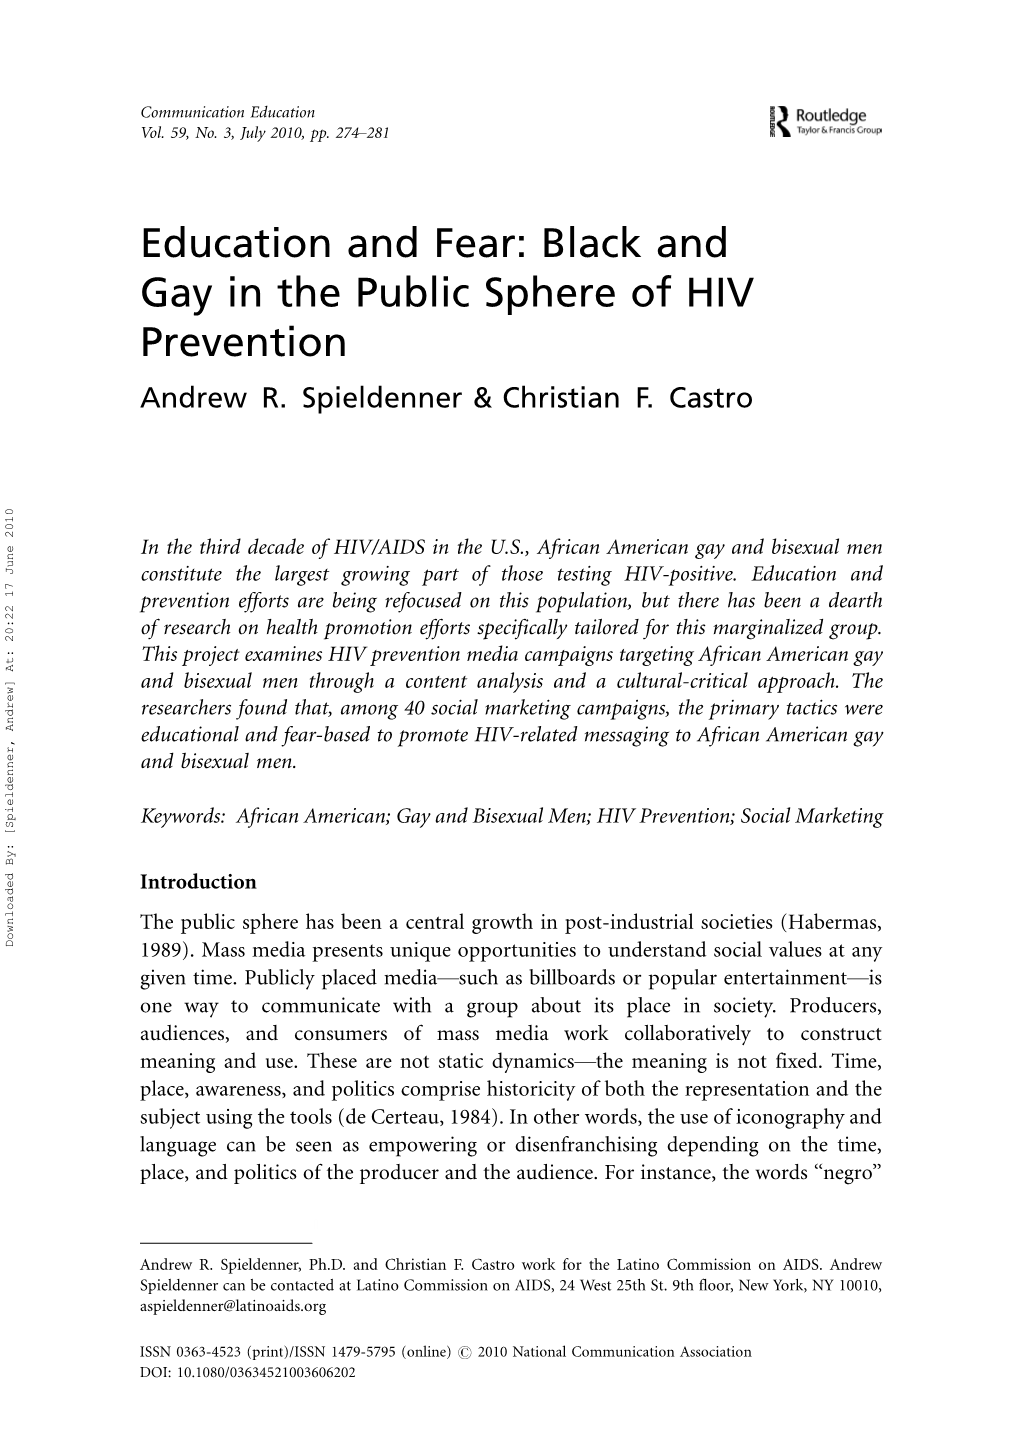 Education and Fear: Black and Gay in the Public Sphere of HIV Prevention Andrew R